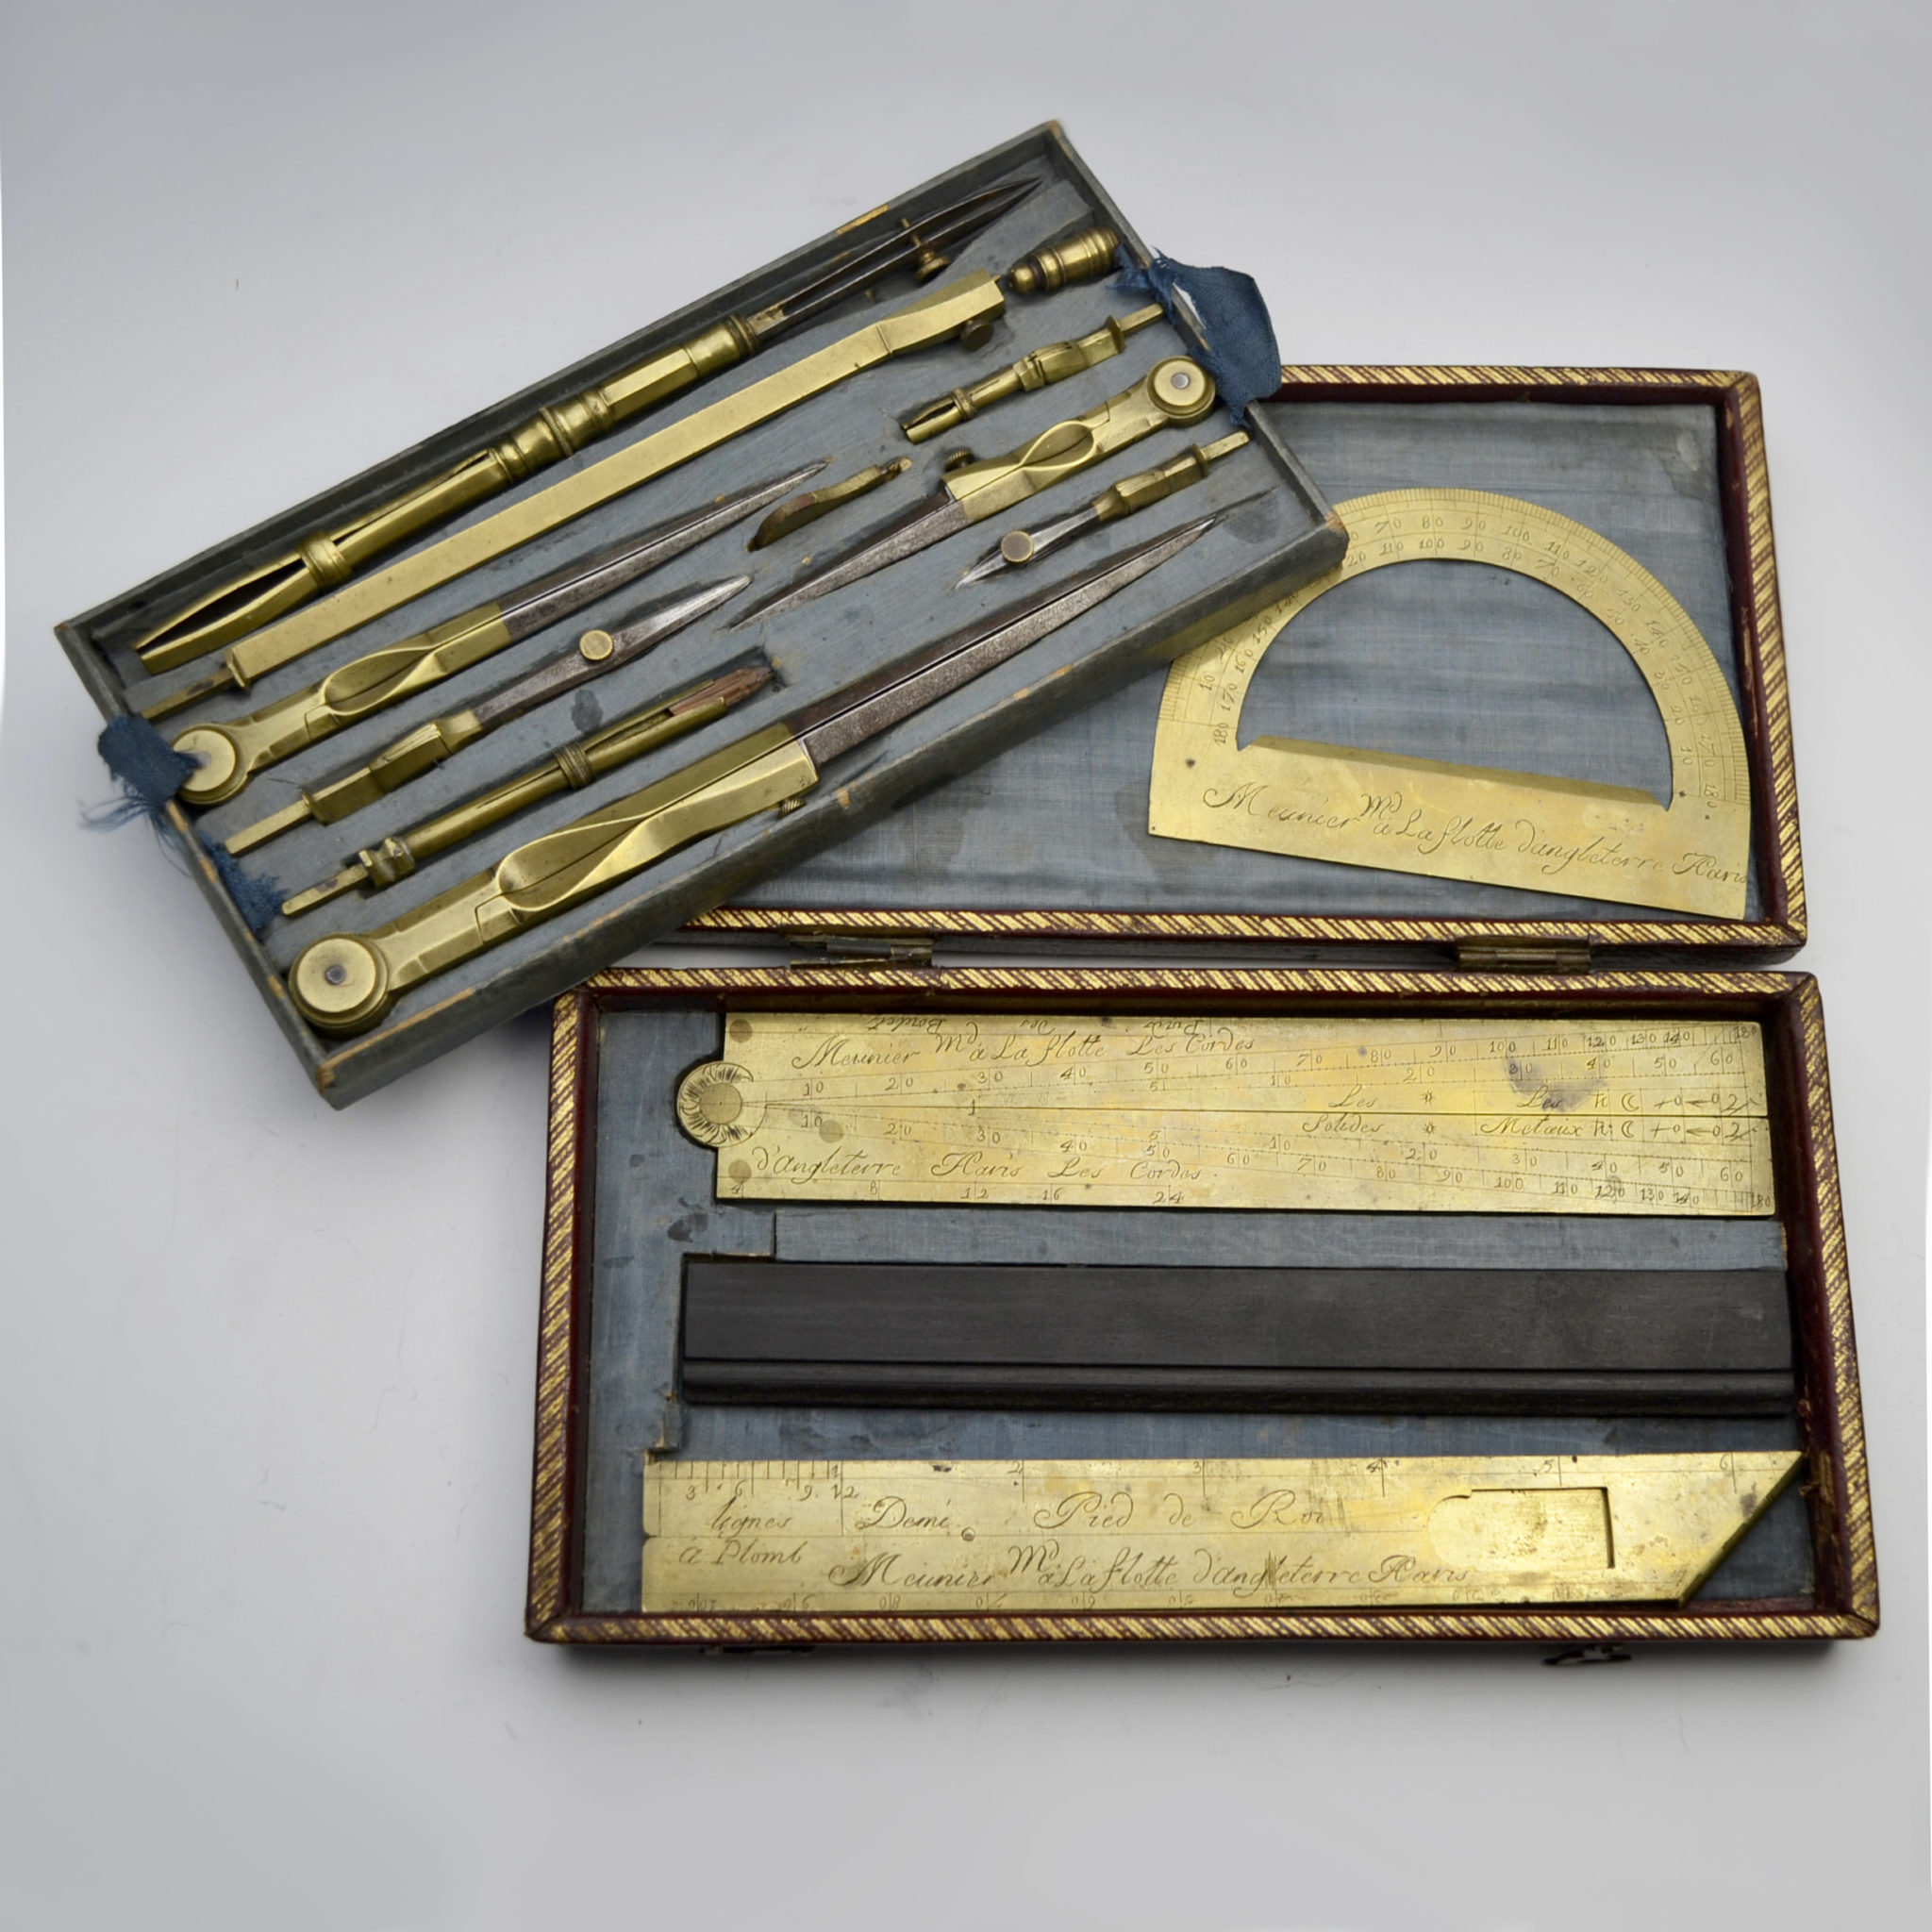 Exceptional gilt Moroccan leather cased drawing instruments by Meunier, circa 1780